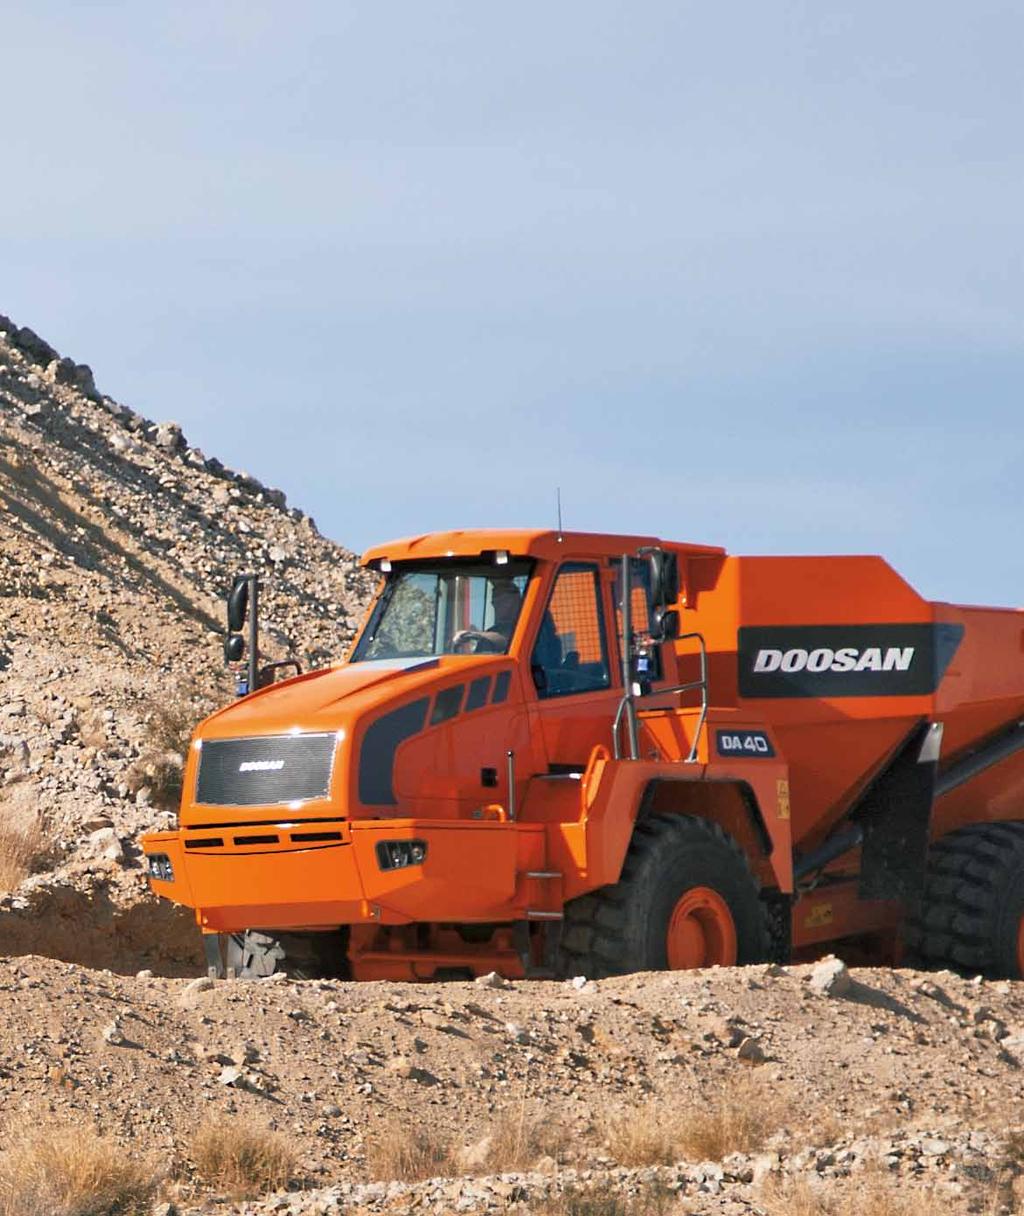 DOOSAN DELIVERS a heritage of dedication Doosan, a strong, stable and global company with a 115-year legacy, has a heritage in equipment